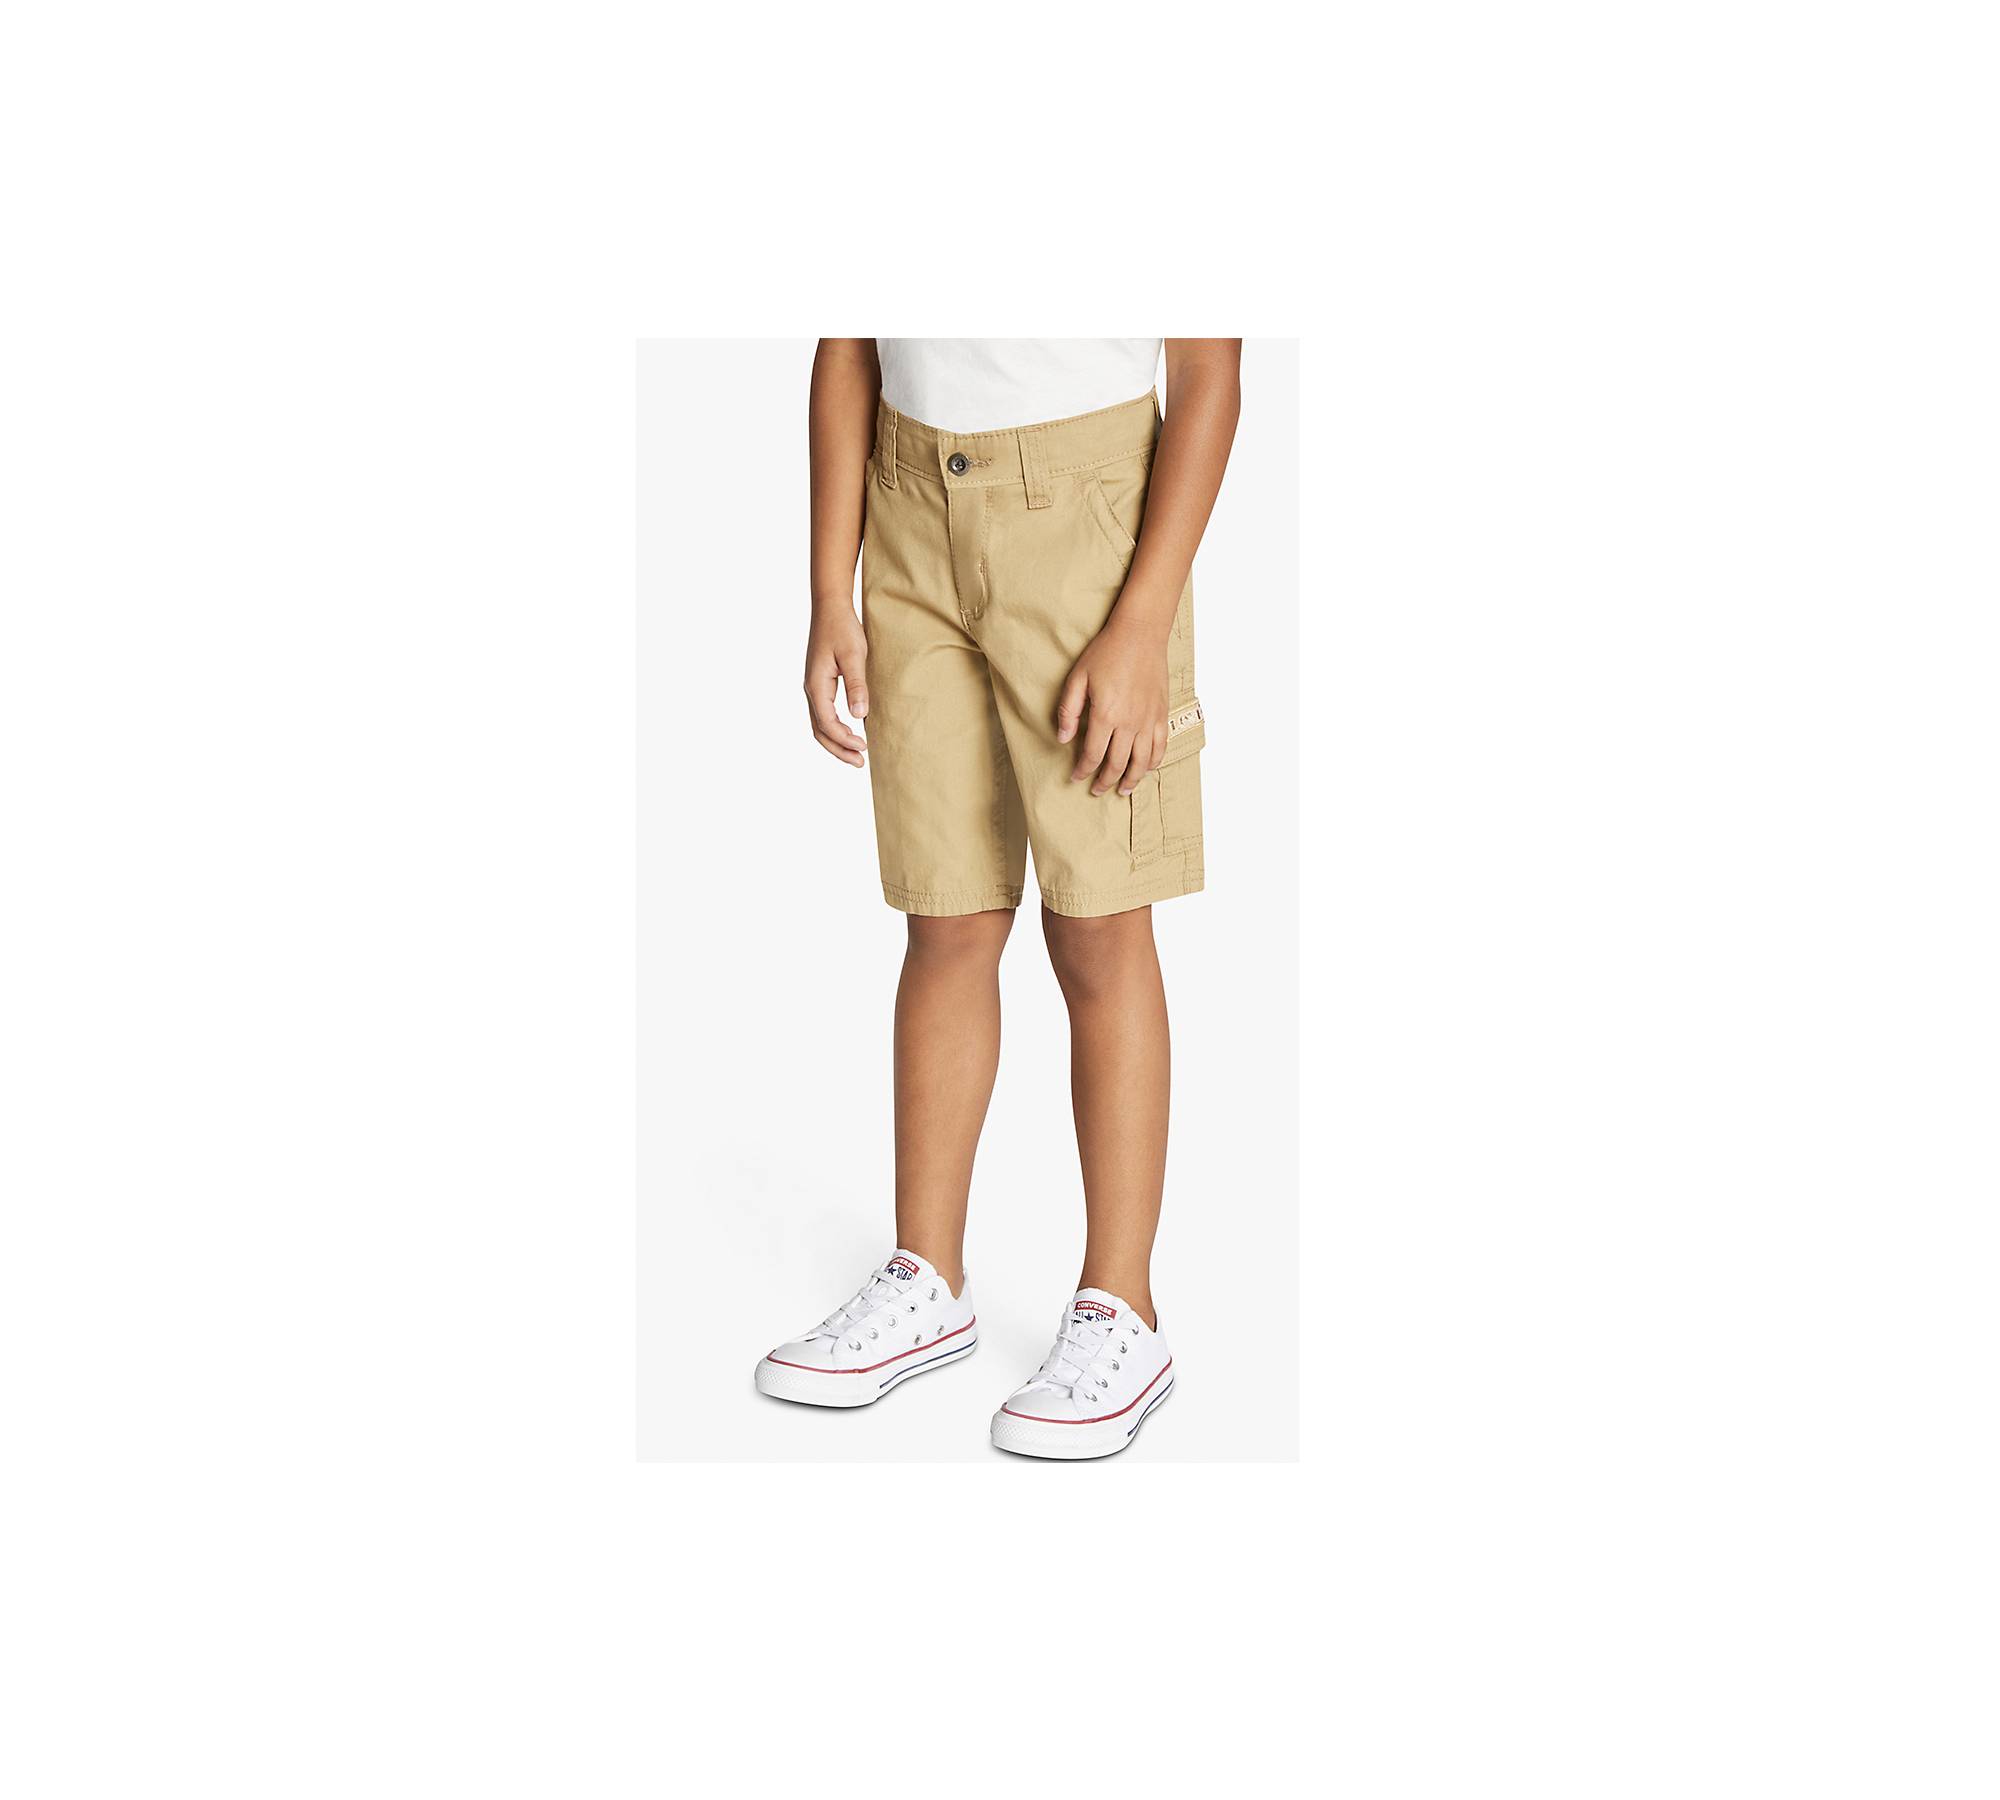 Relaxed Fit Xx Shorts Little Boys 4-7x - Brown US